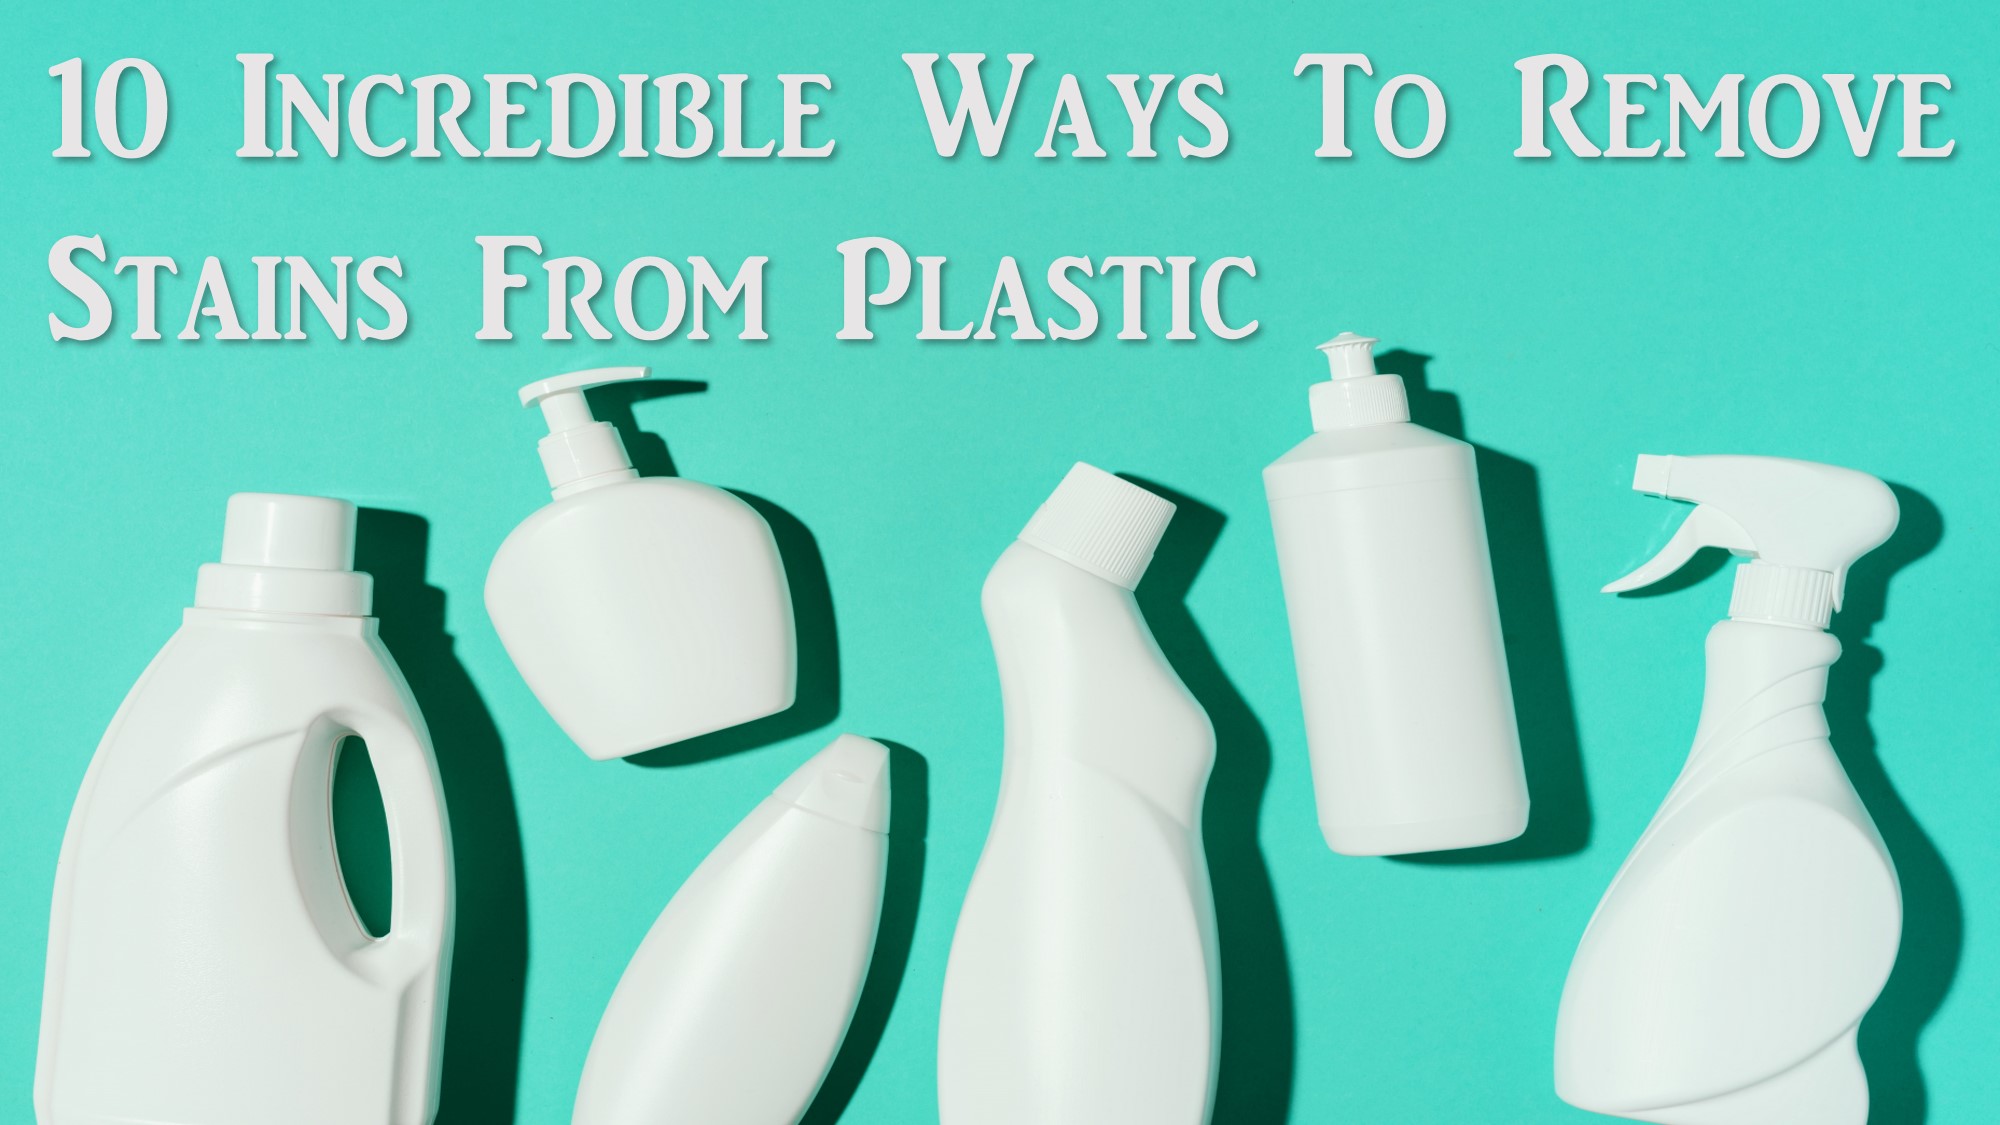 10 Incredible Ways To Remove Stains From Plastic. #7 Will Surprise You!